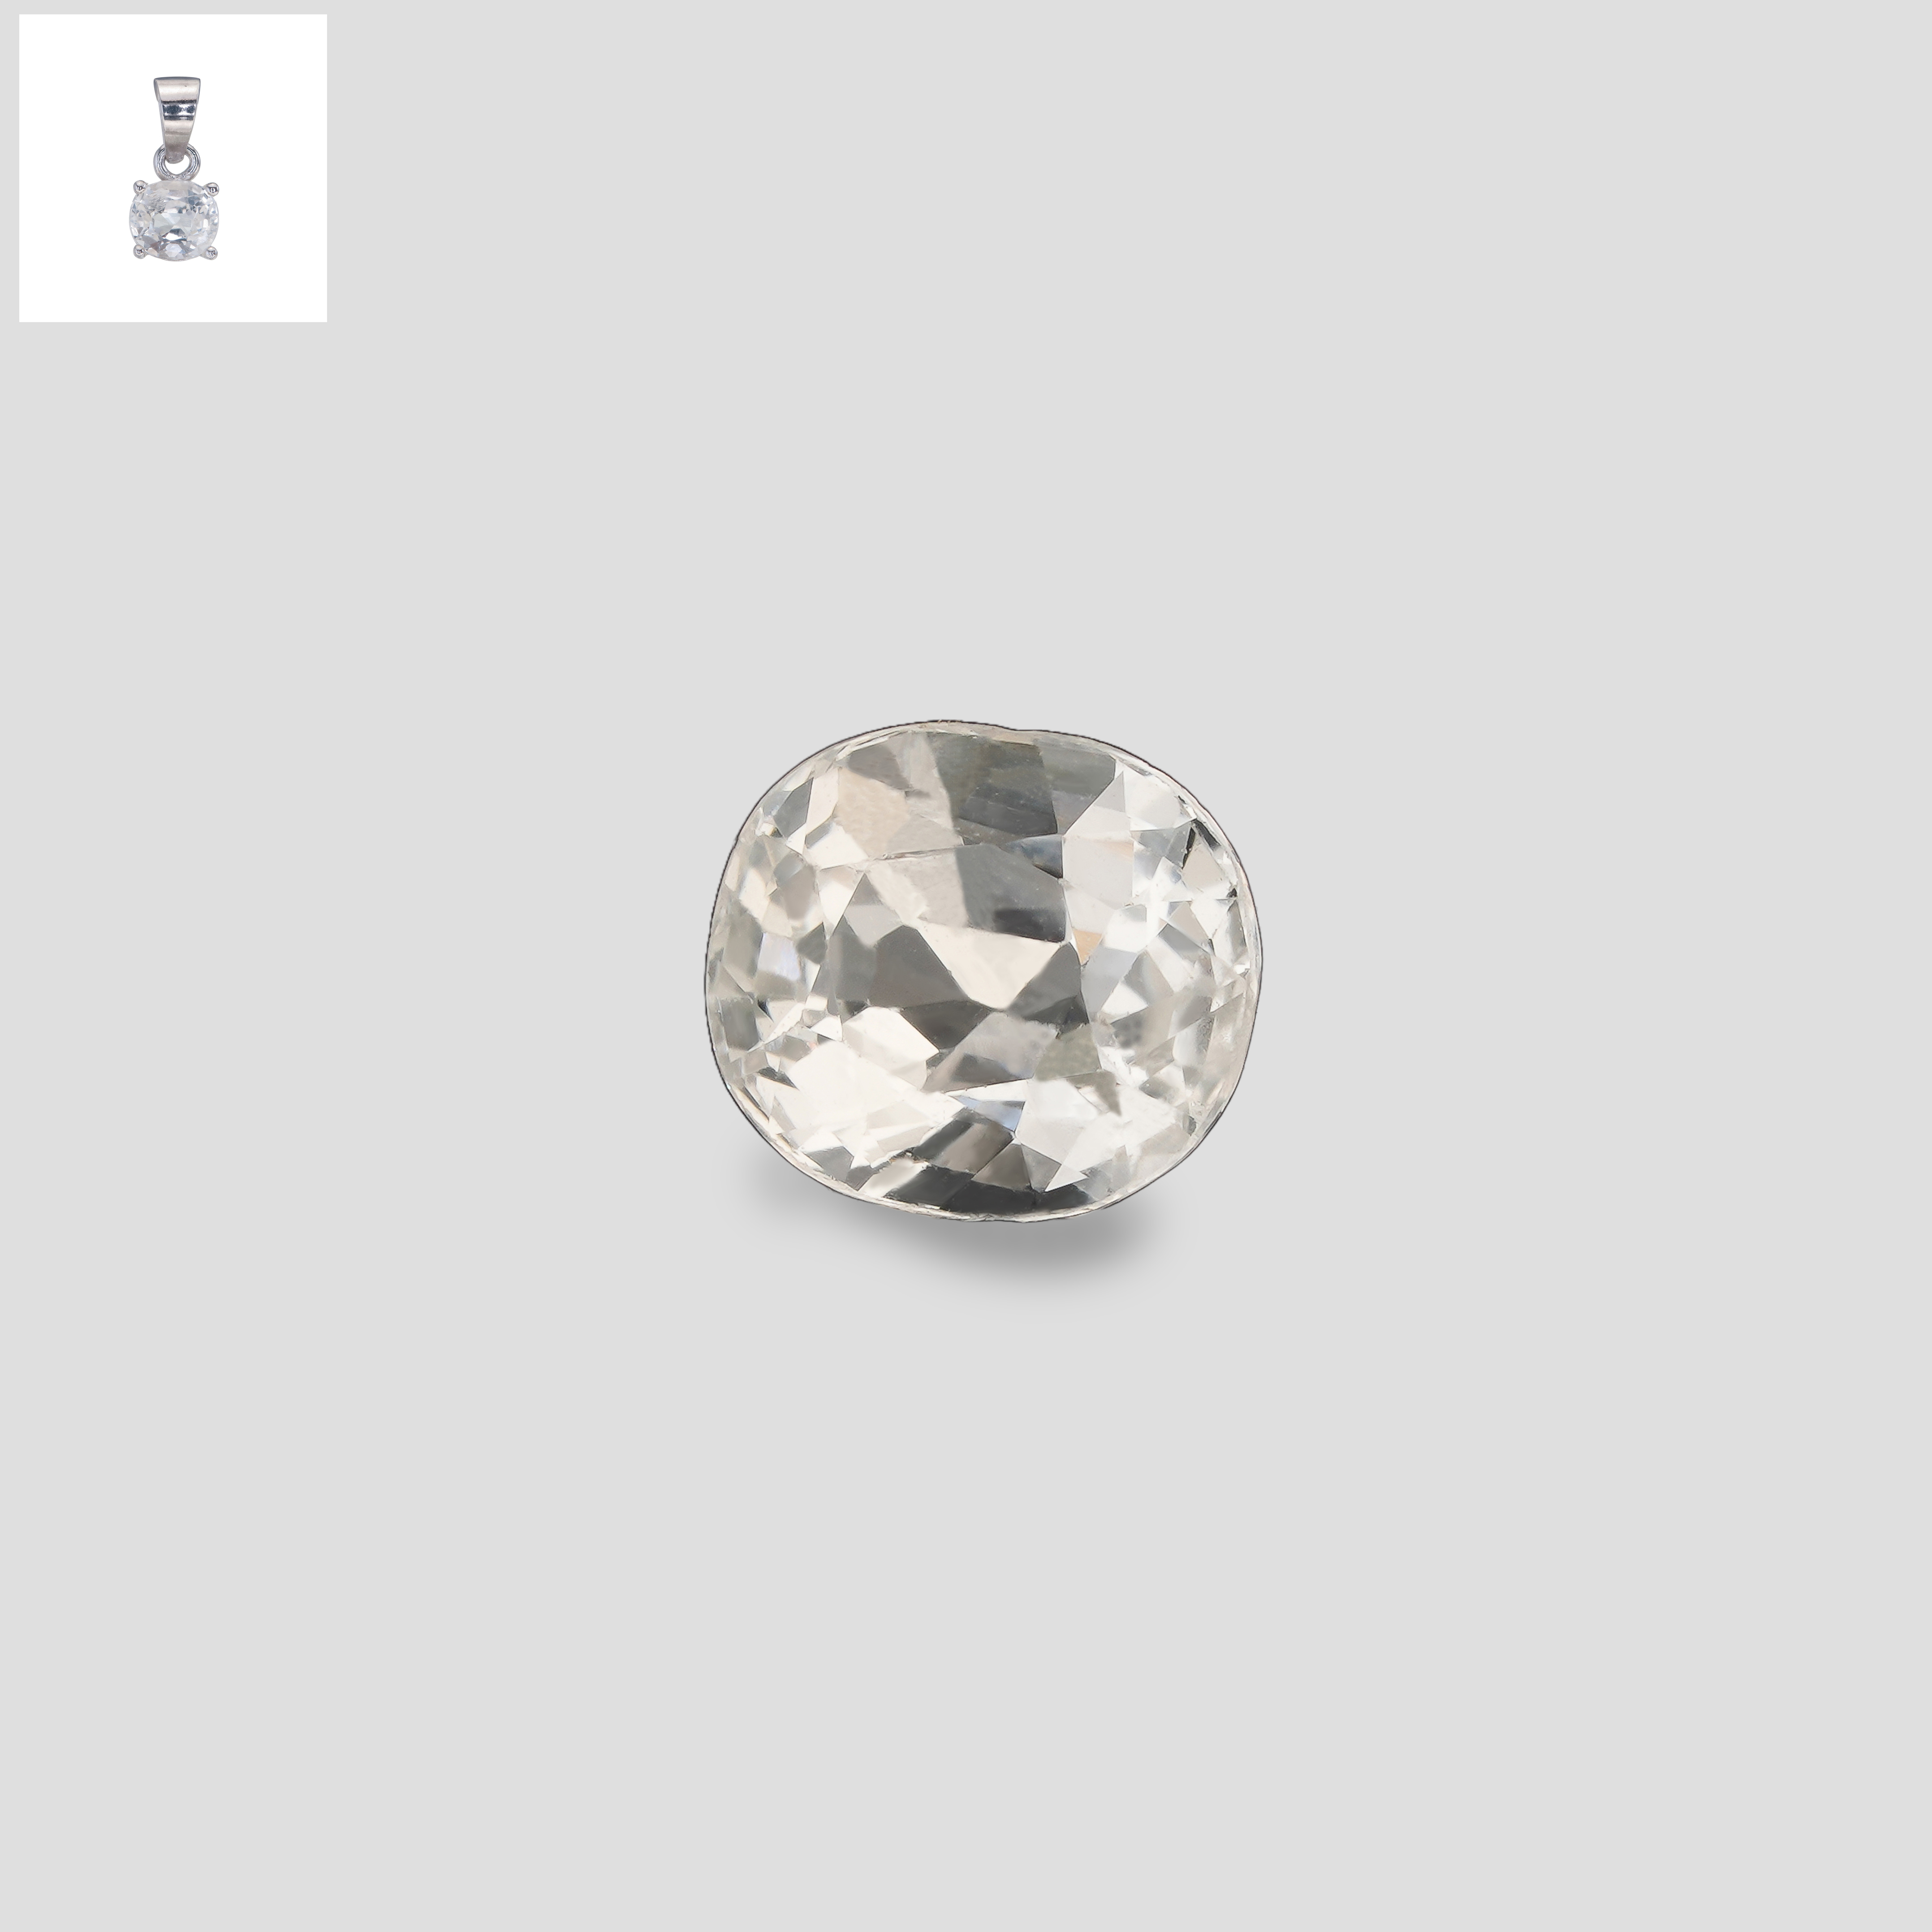 Looks like a diamond at a fraction of the price,1.15ct.